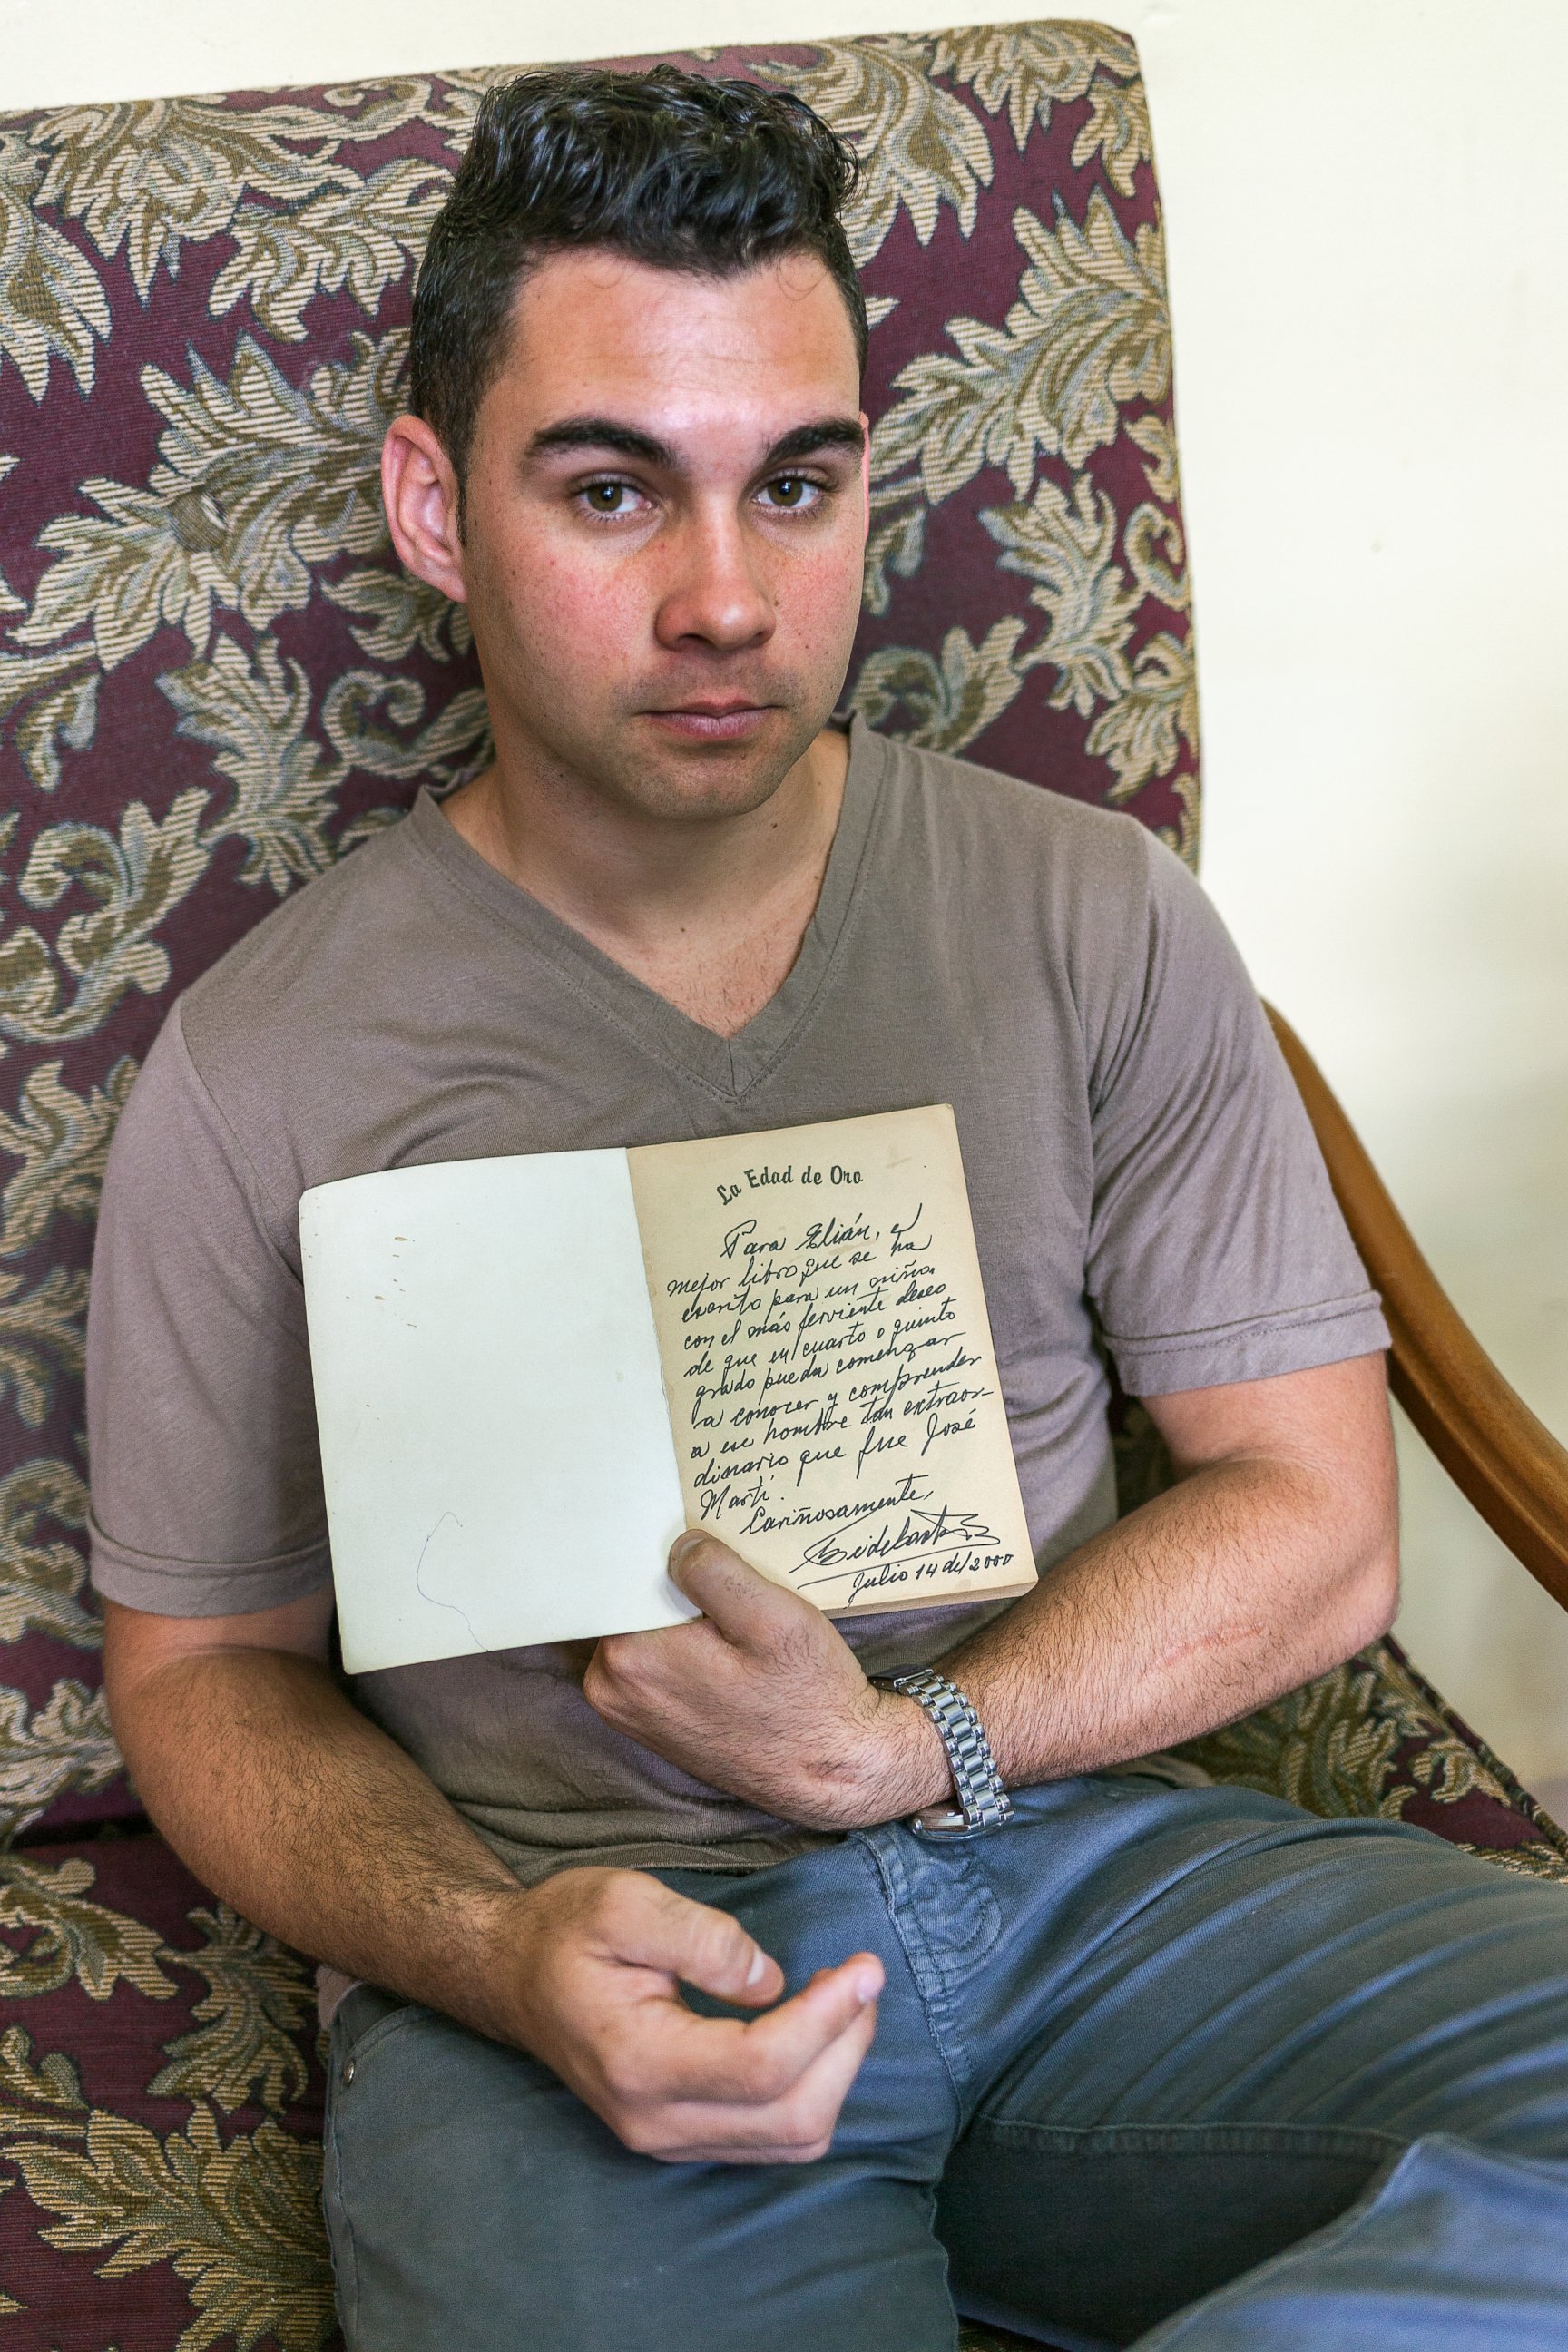 PHOTO: Elian Gonzalez holds a copy of "La Edad de Oro" by Jose Marti, given to him and signed by Fidel Castro, July 2000.